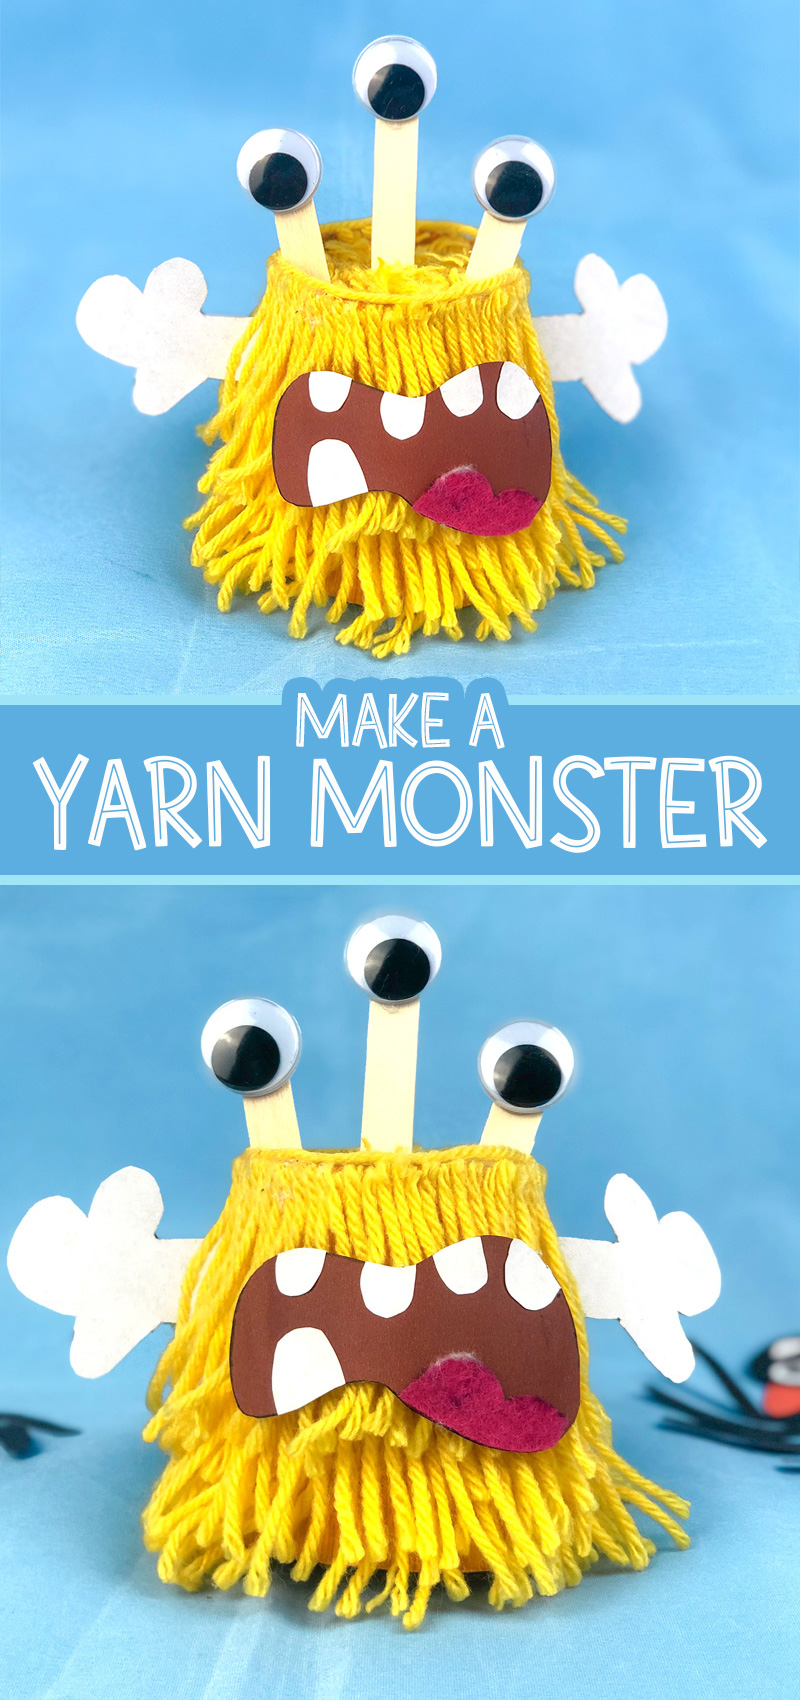 yarn monster craft hero collage with text that says "make a yarn monster"